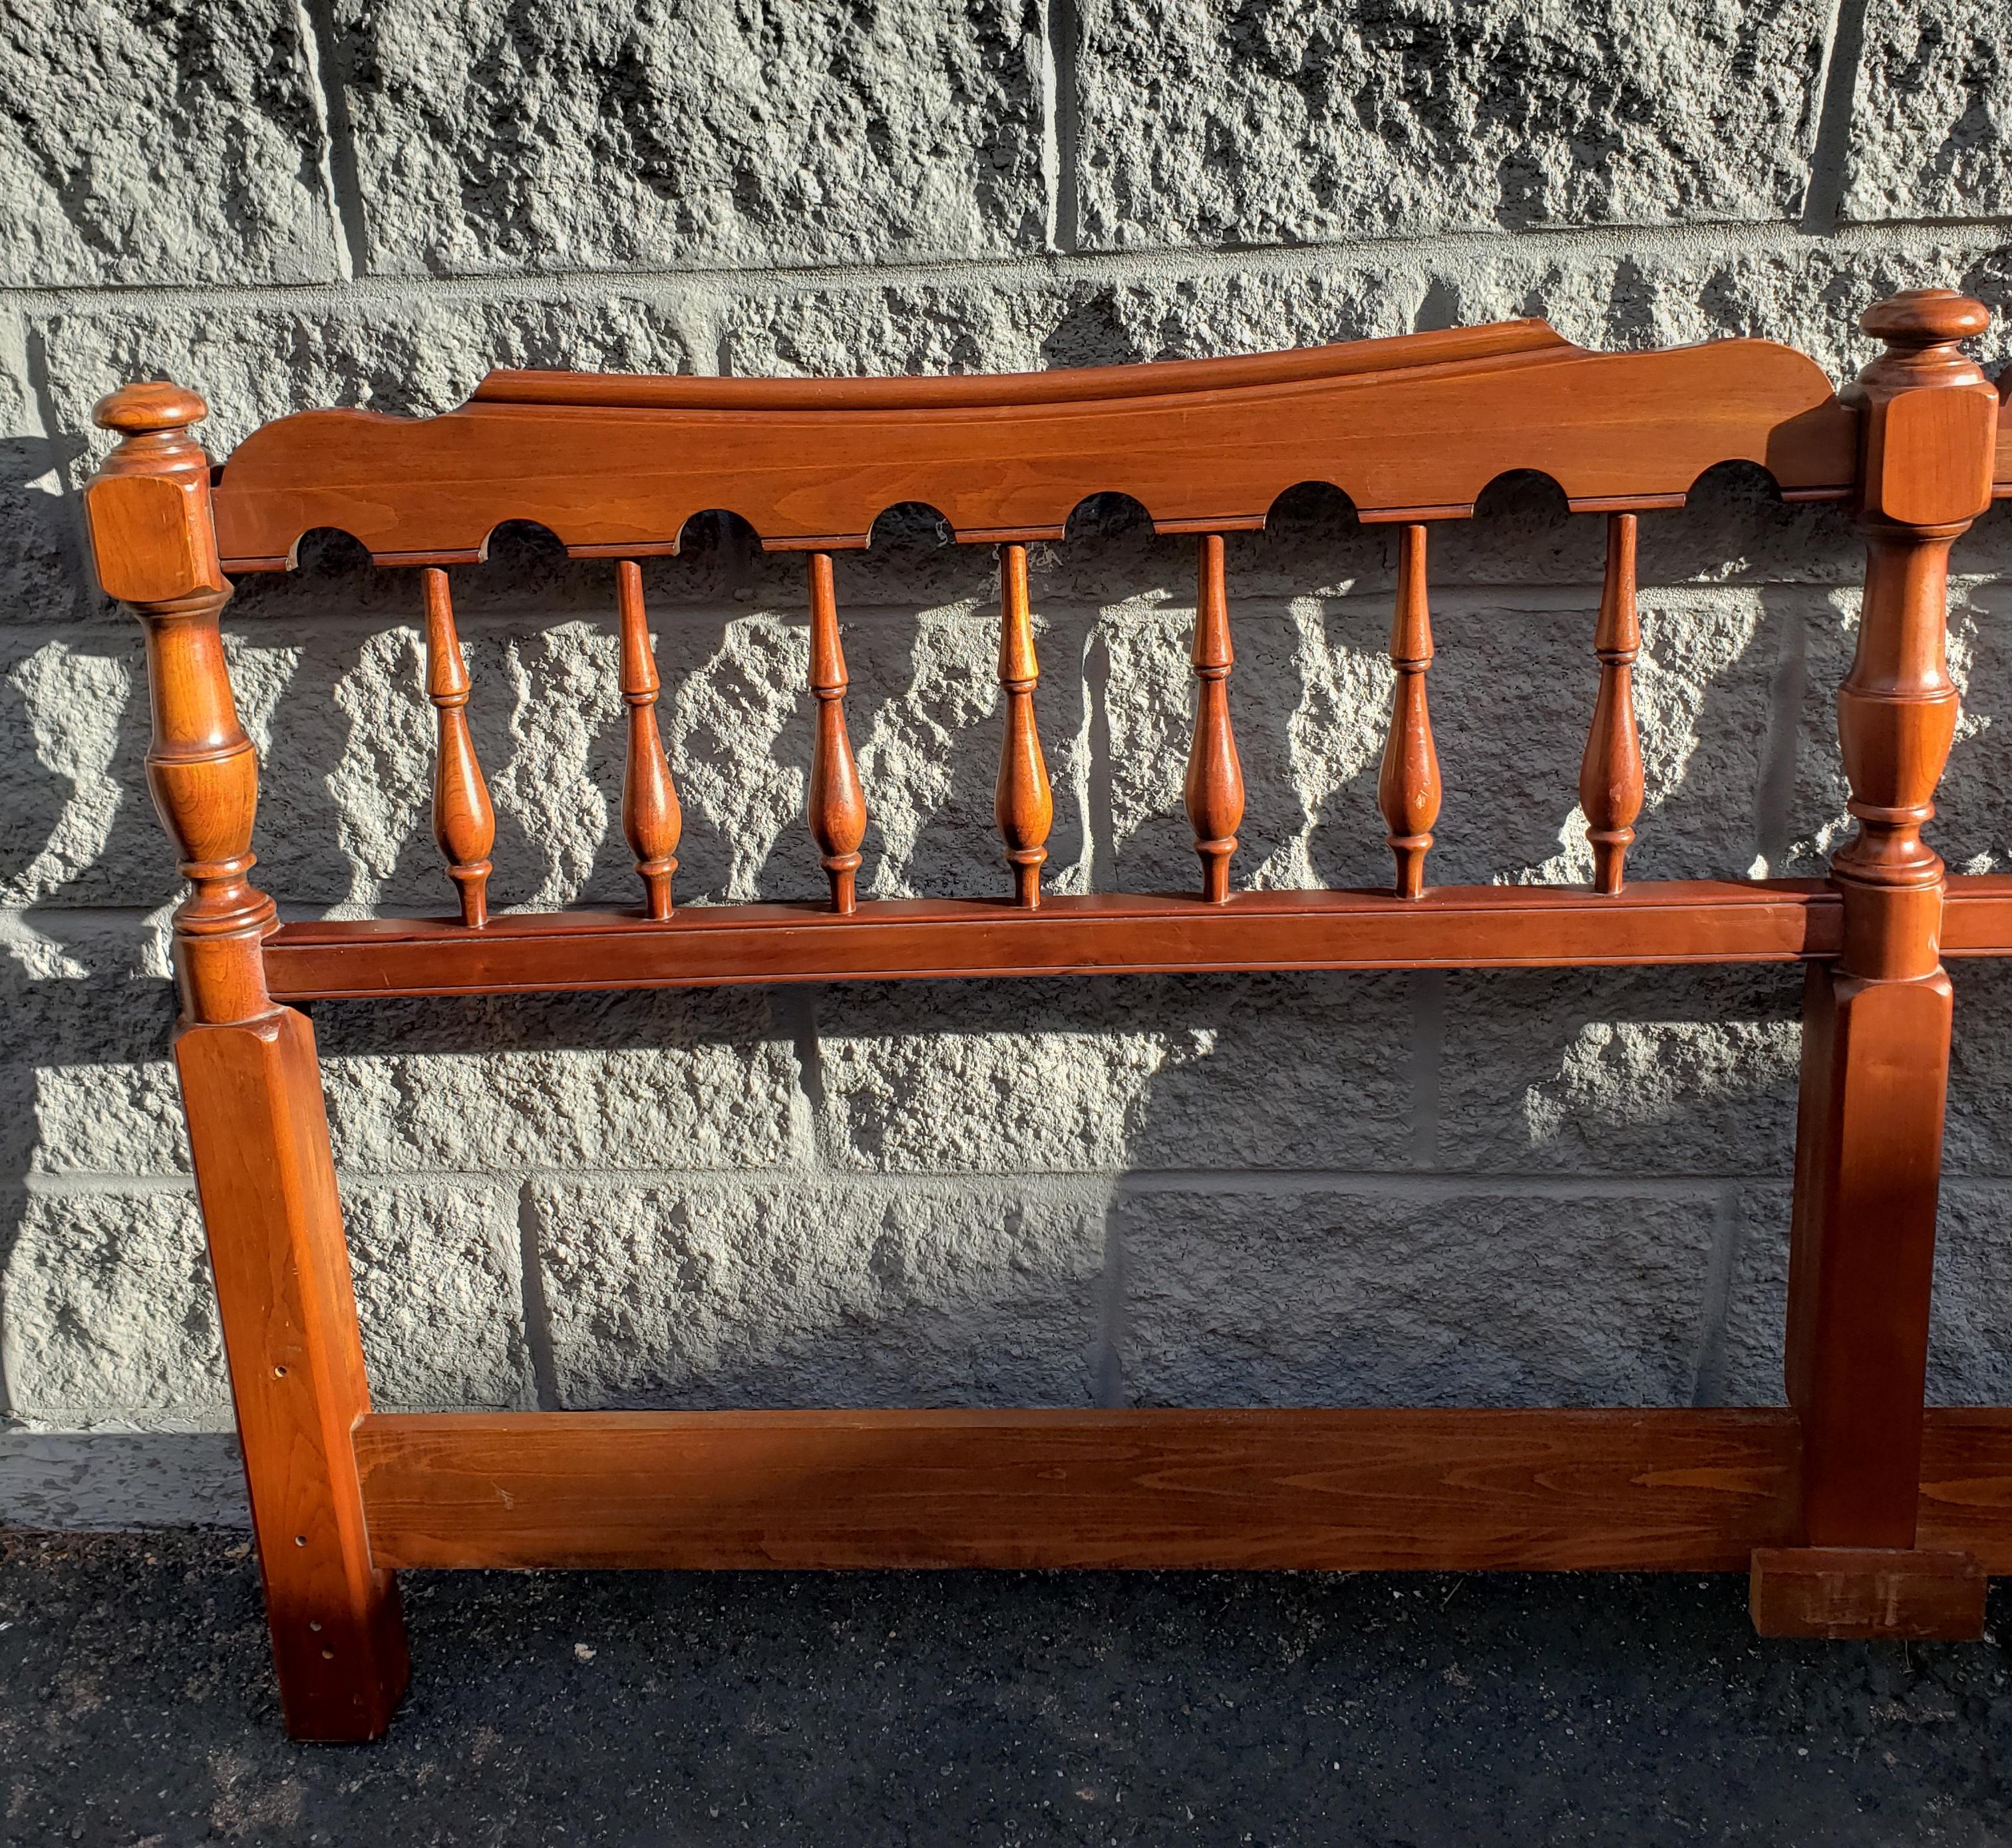 Pennsylvania house candlelight mahogany king size headboard. In very good condition. Measures 79